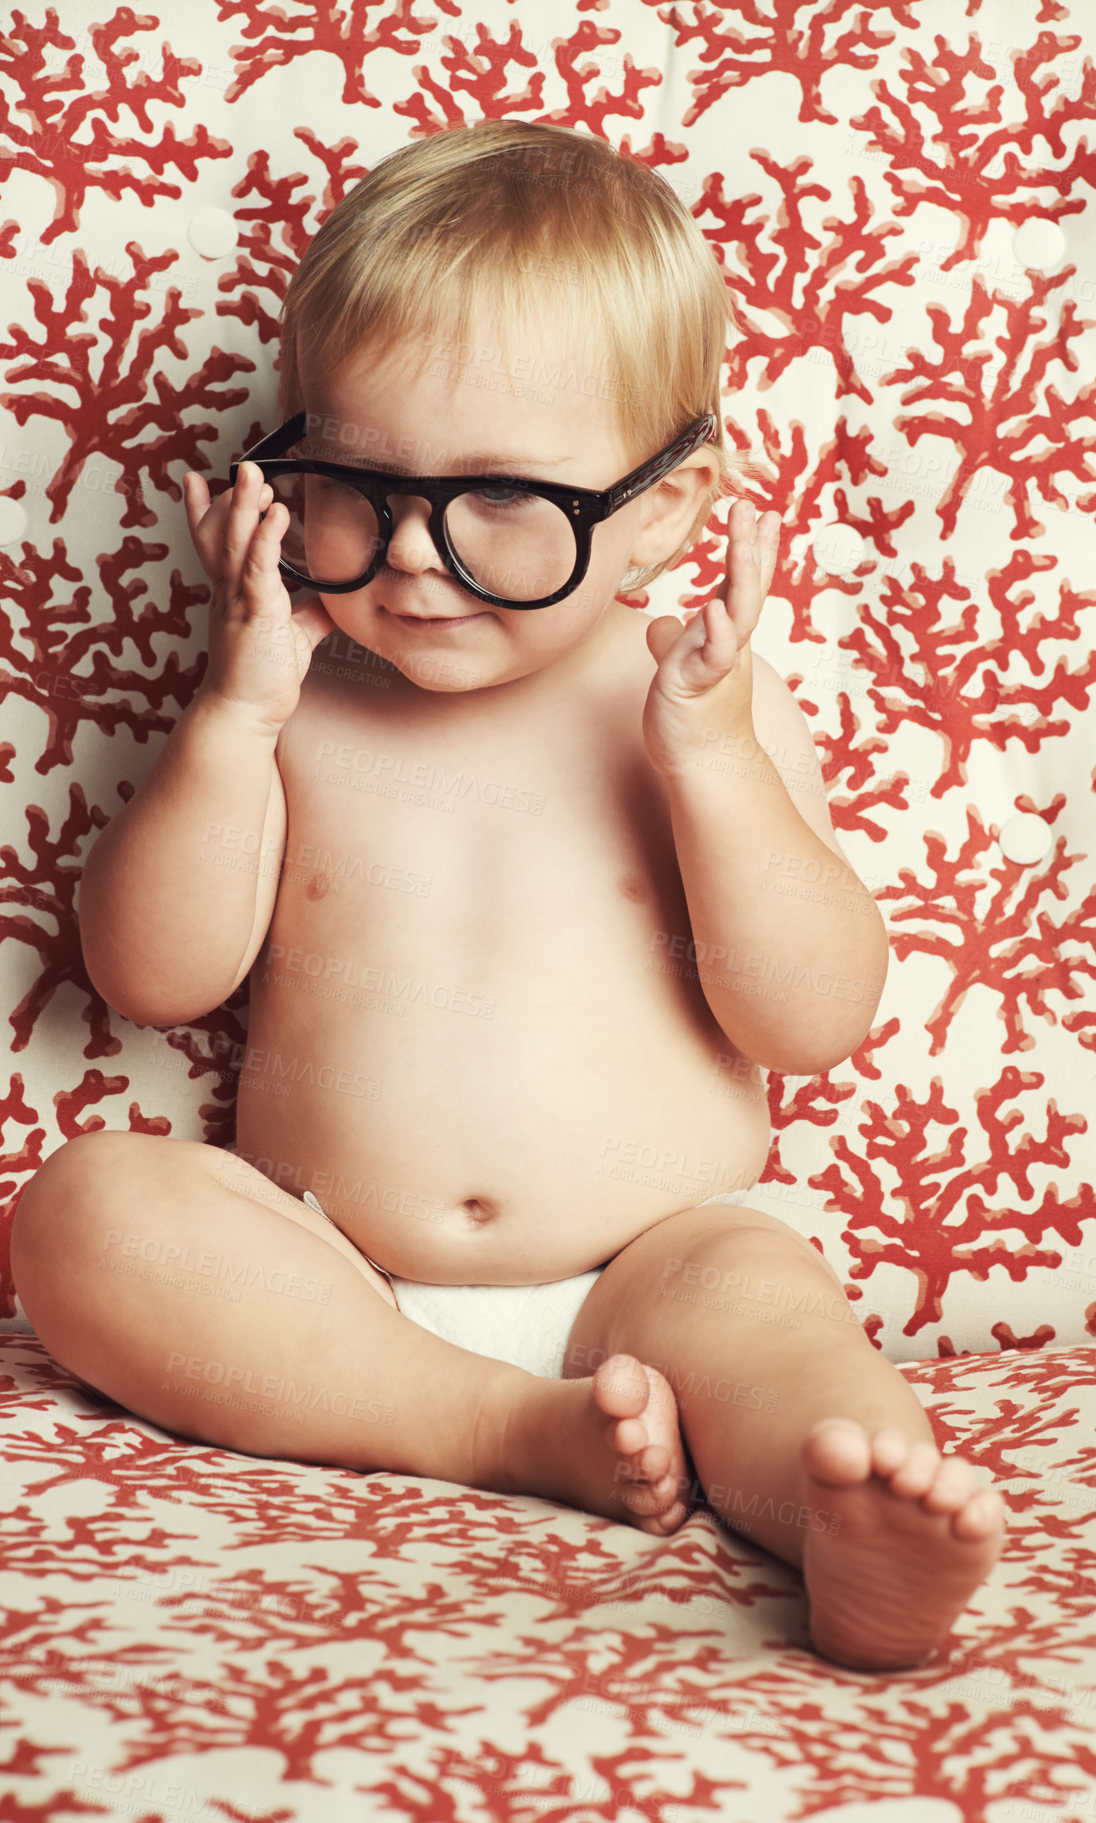 Buy stock photo Smile, glasses and fun baby in studio with vision, eye care and health for child development. Happy, cute and young infant, toddler or kid playing with spectacles or eyewear by wallpaper background.